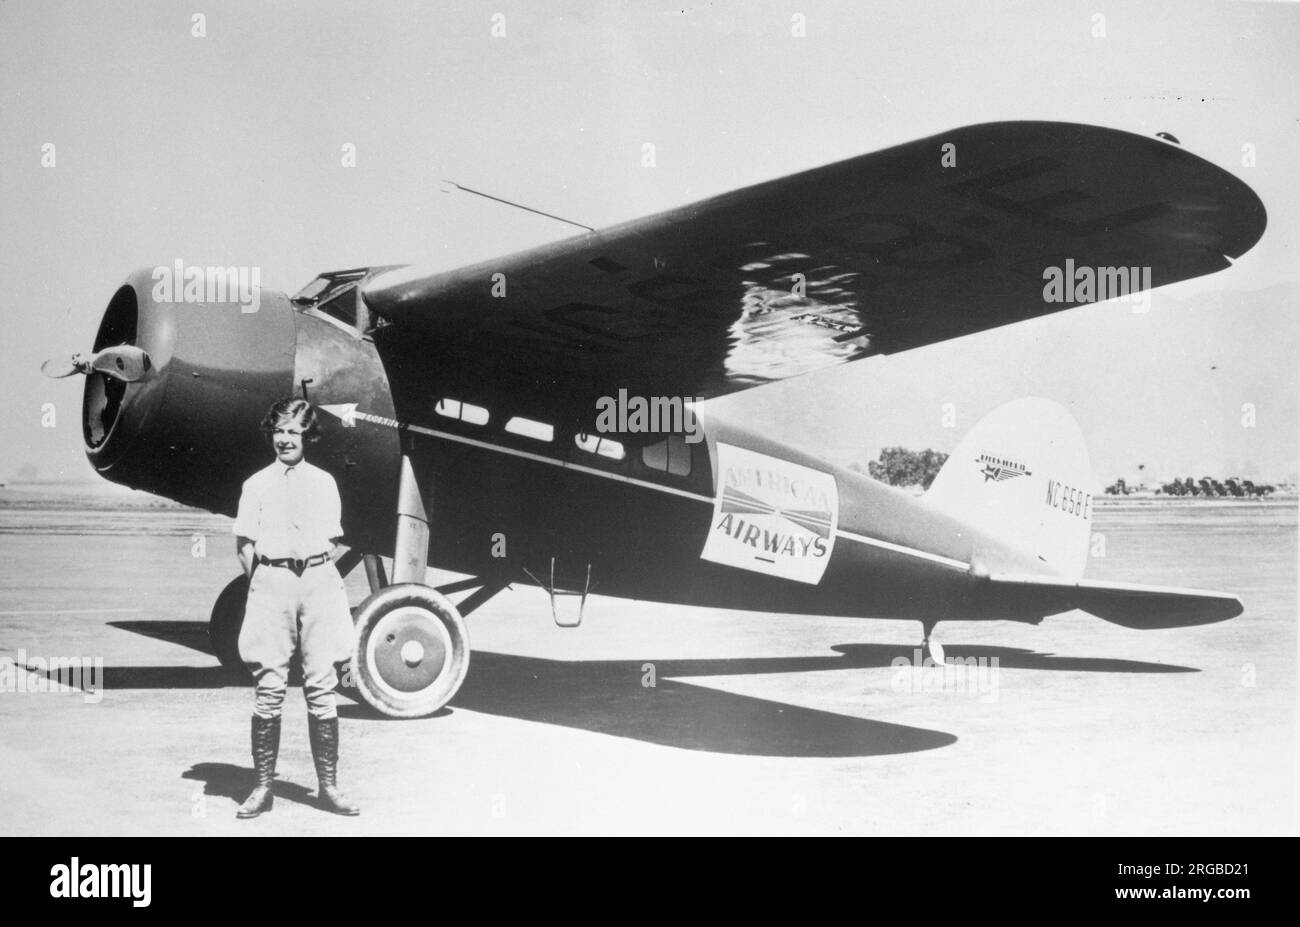 Lockheed Vega 5 NC658E (msn 55), in American Airways livery, with noted aviatrix Elinor Smith, at age 19, standing in front of it. Elinor Smith was the youngest pilot to gain a commercial licence and set a world record , when she was only 16! The connection with the Vega is unknown. Stock Photo